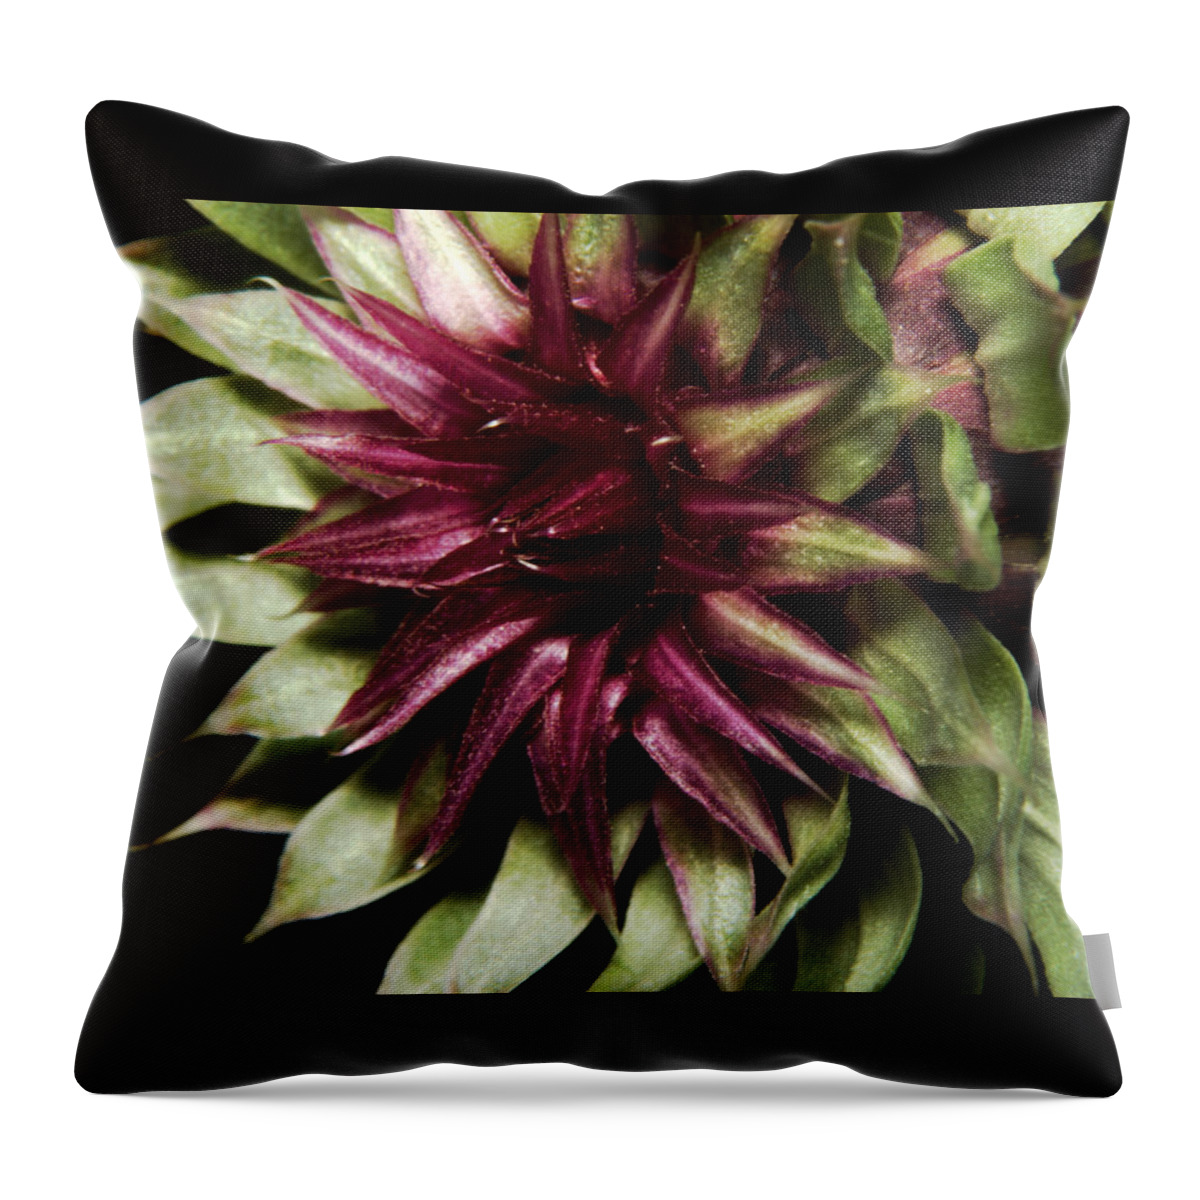 Thistle Throw Pillow featuring the photograph Thistle 01 by Karen Musick